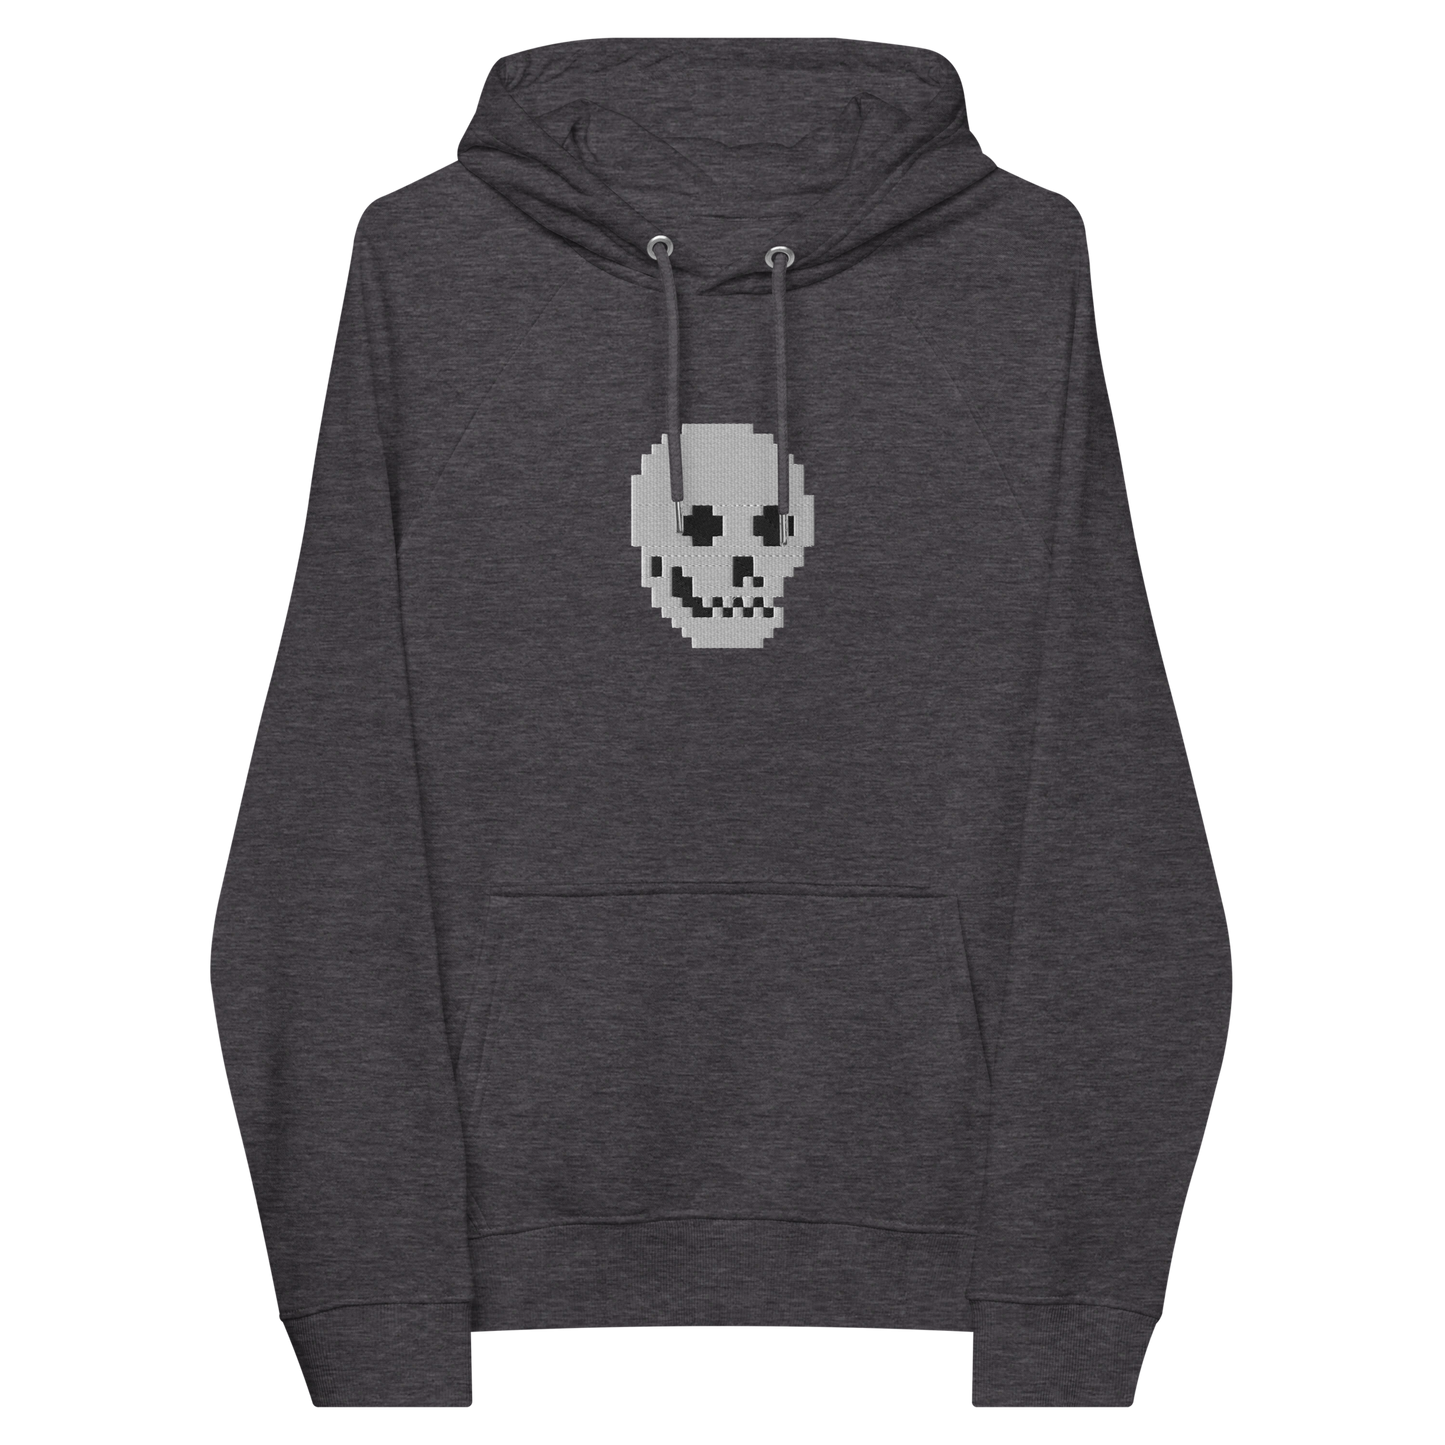 The Embroidered Ghoul Hoodie